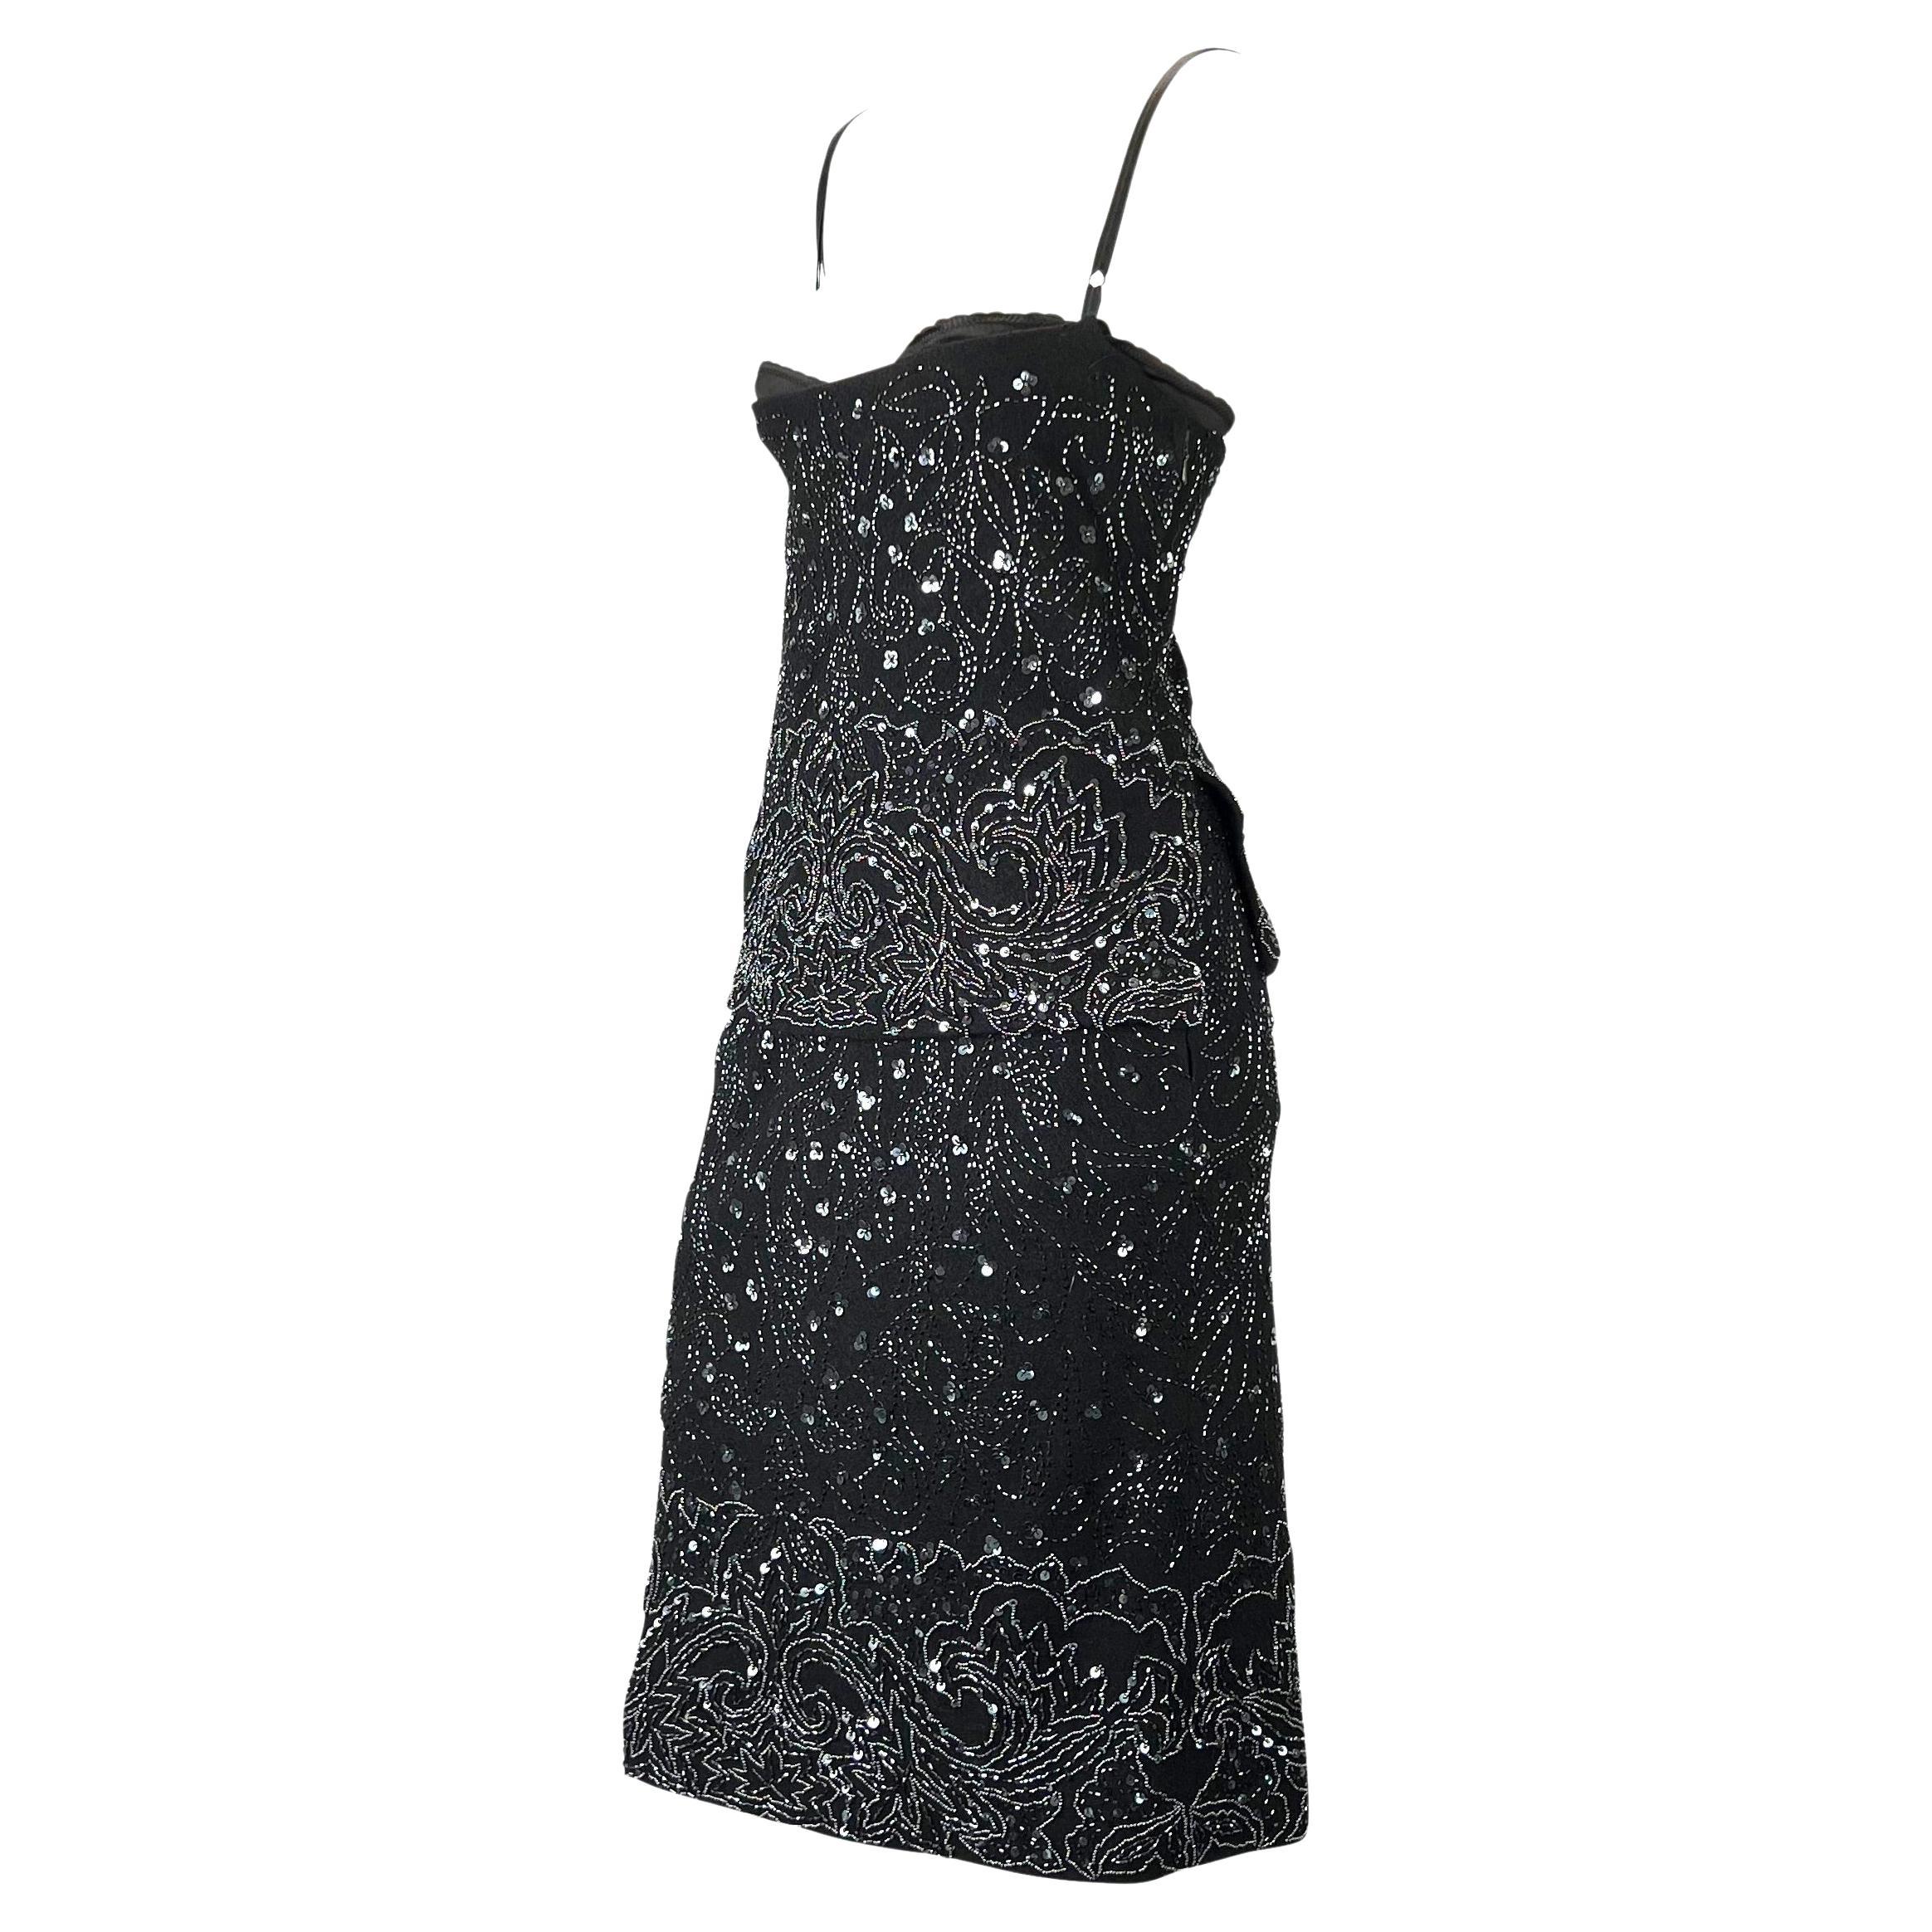 S/S 1999 Dolce & Gabbana Black Wool Beaded Skirt Bustier Top Set In Good Condition For Sale In West Hollywood, CA